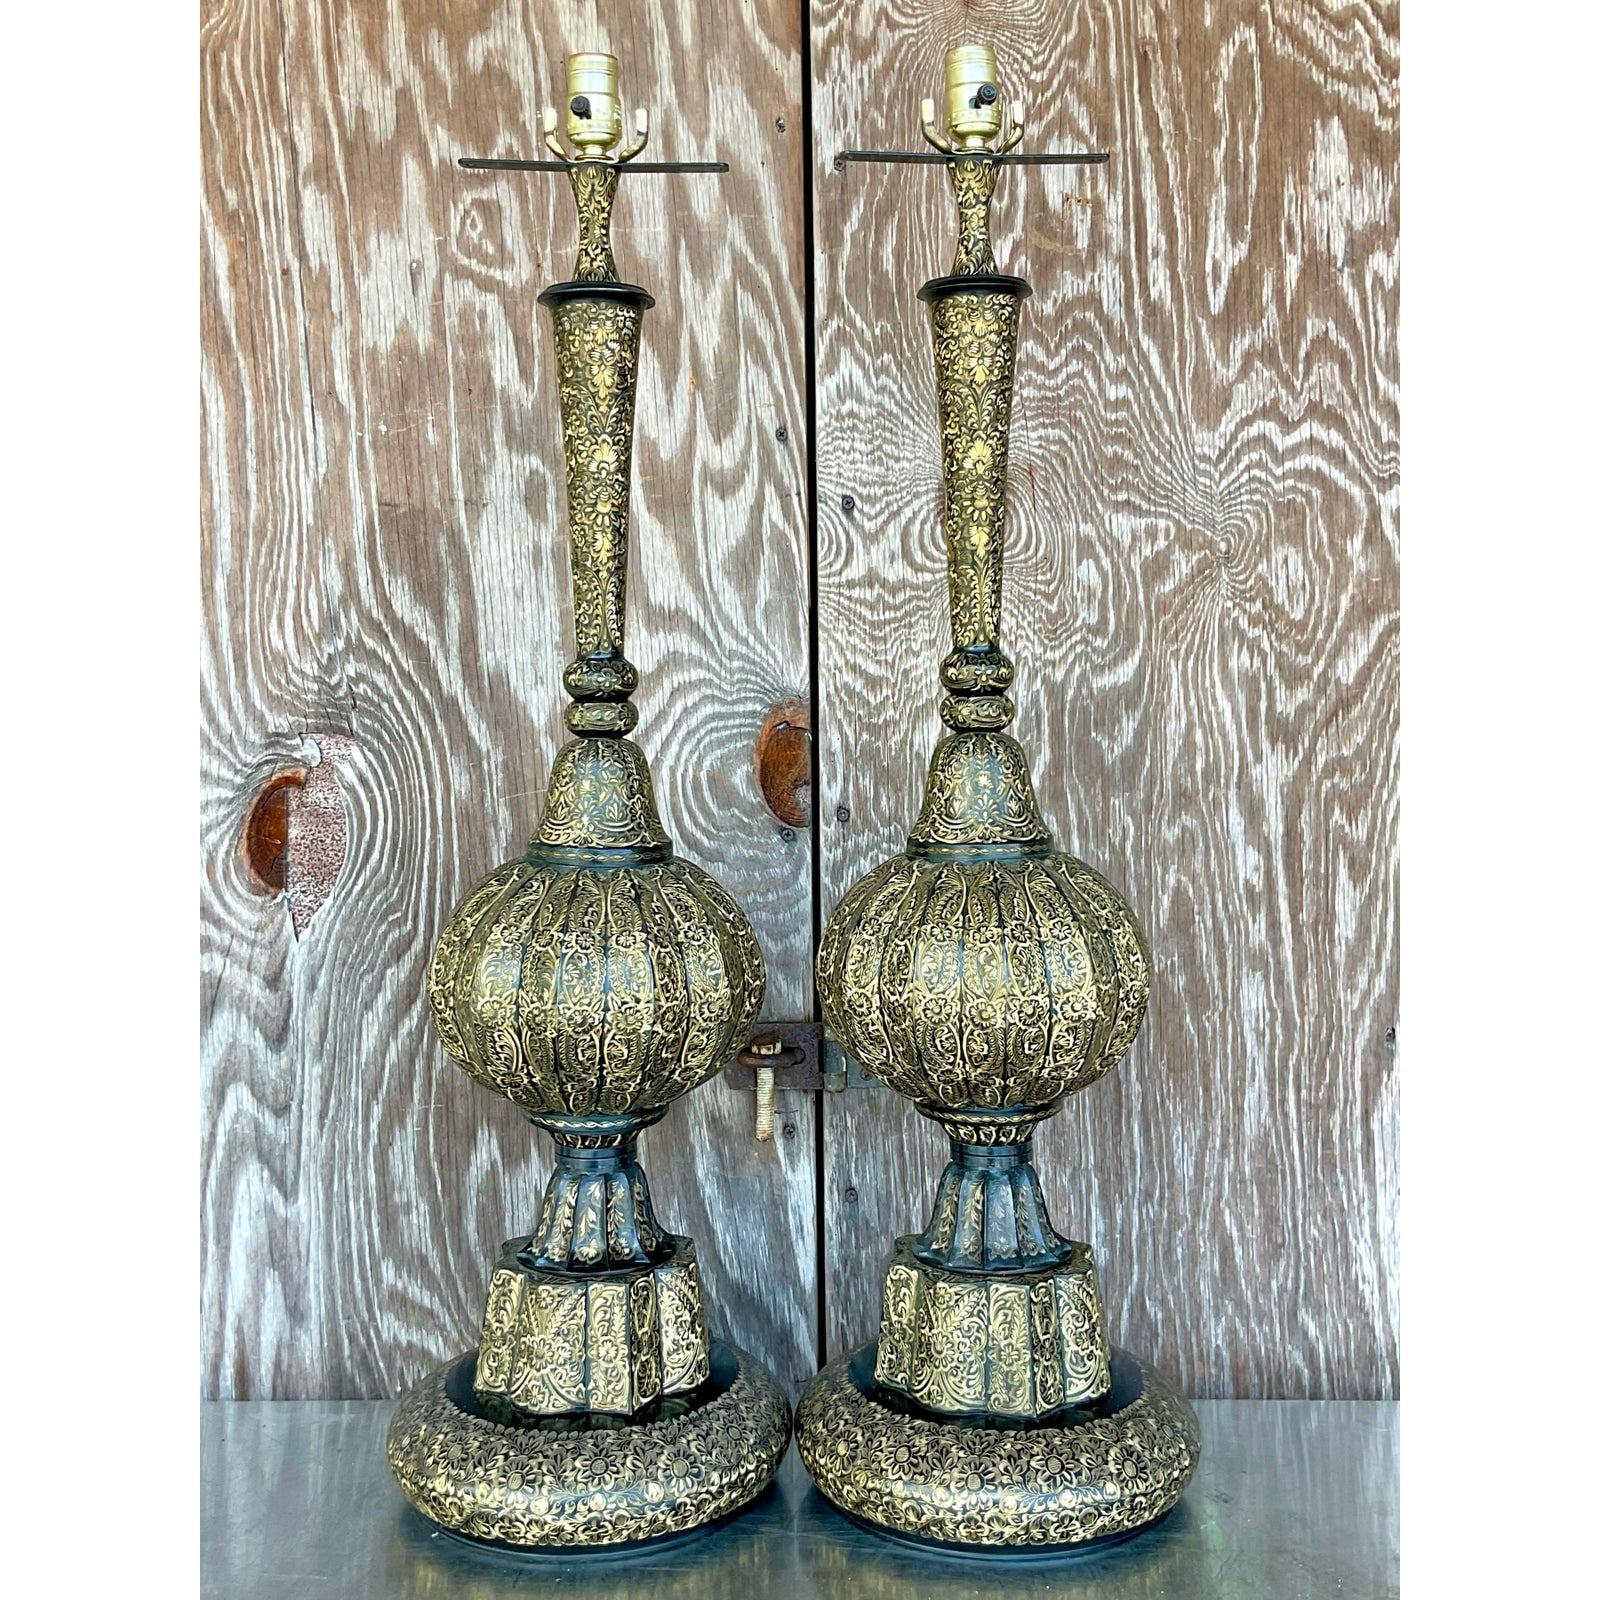 Vintage Boho Moroccan Etched Enamel and Brass Lamps - a Pair For Sale 2